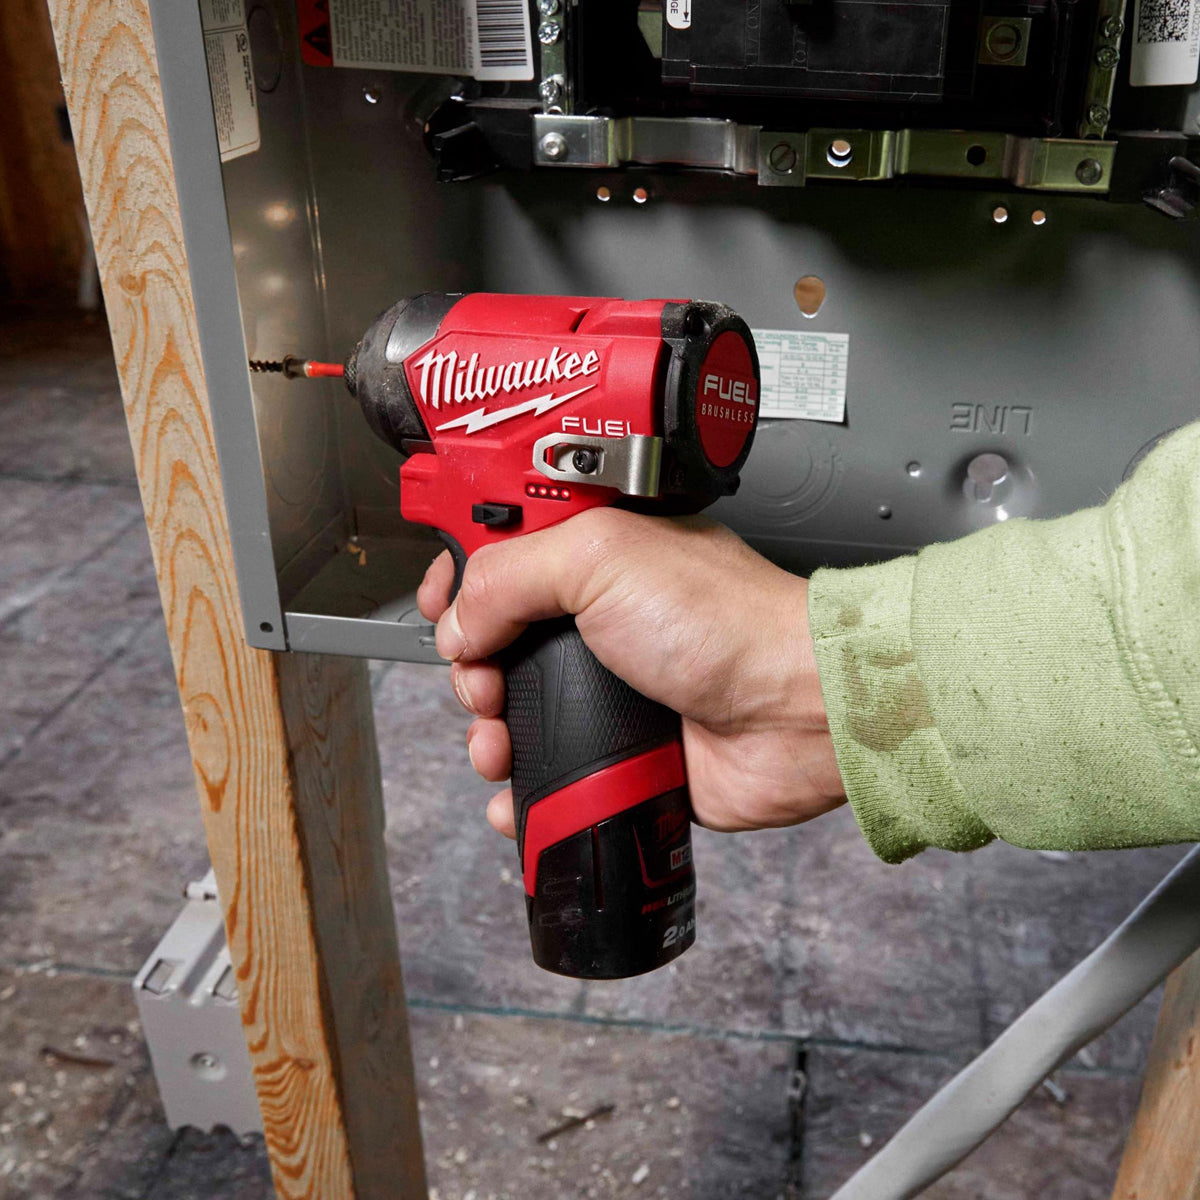 Milwaukee M12FPP2A2-602X 12V Fuel Brushless Combi Drill & Impact Driver with 2 x 6.0Ah Batteries Charger & Case 4933480589